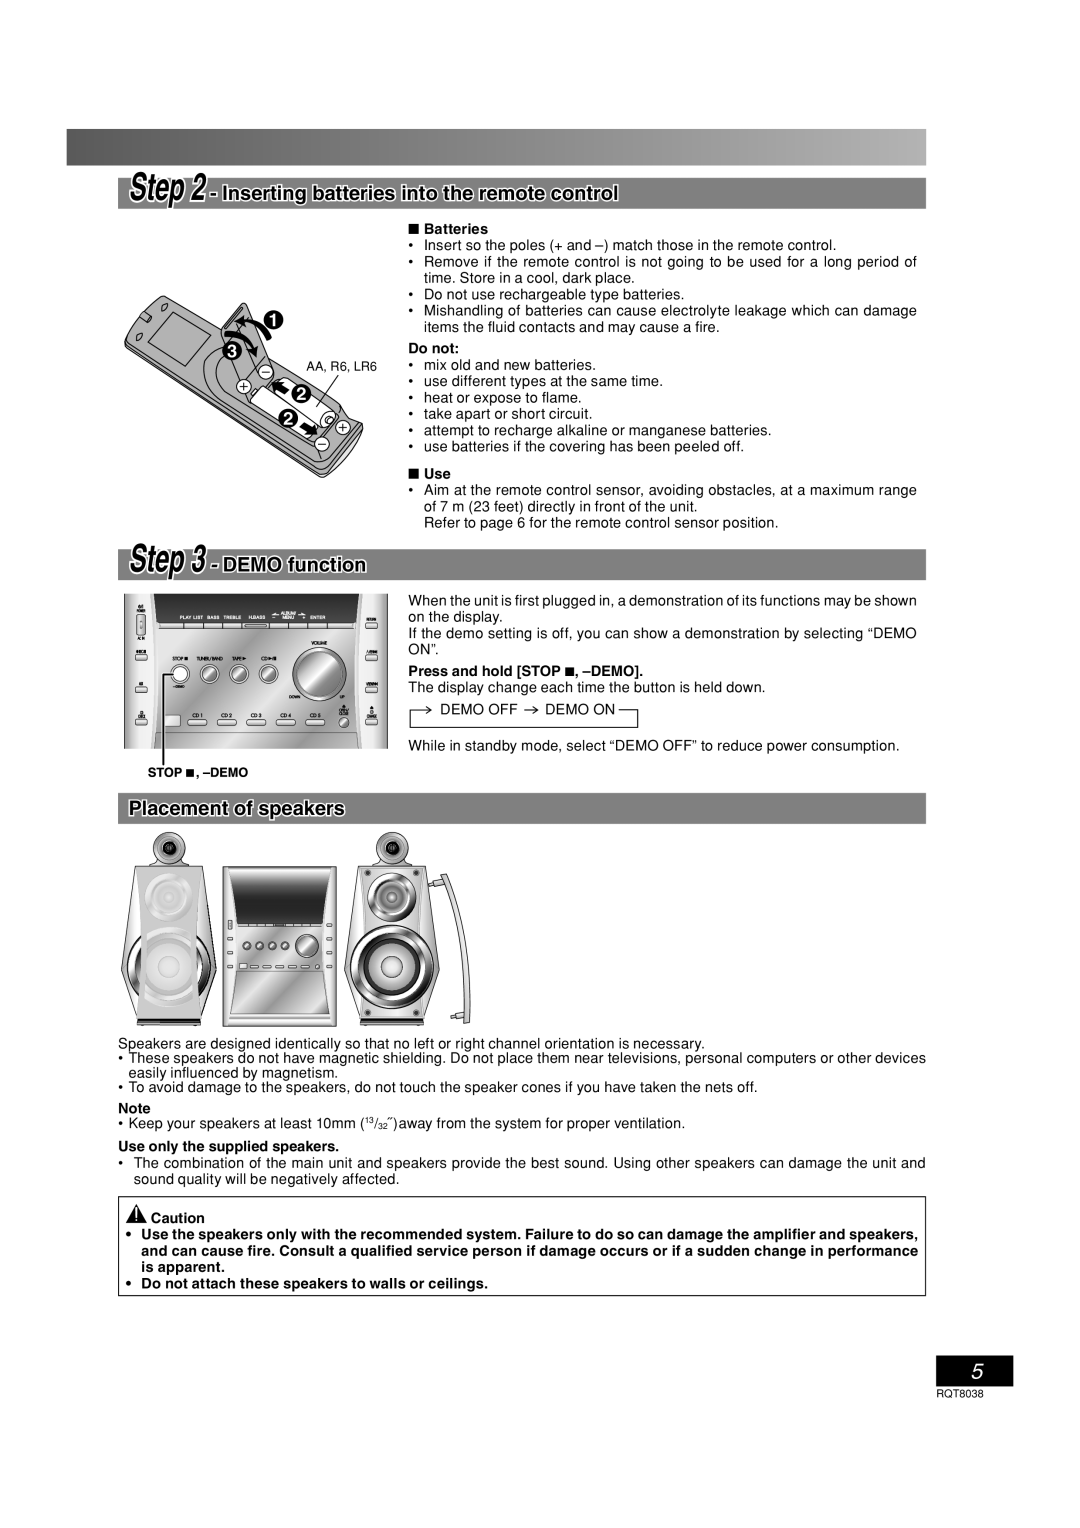 Panasonic SC-PM41 important safety instructions Placement of speakers, DEMO function 